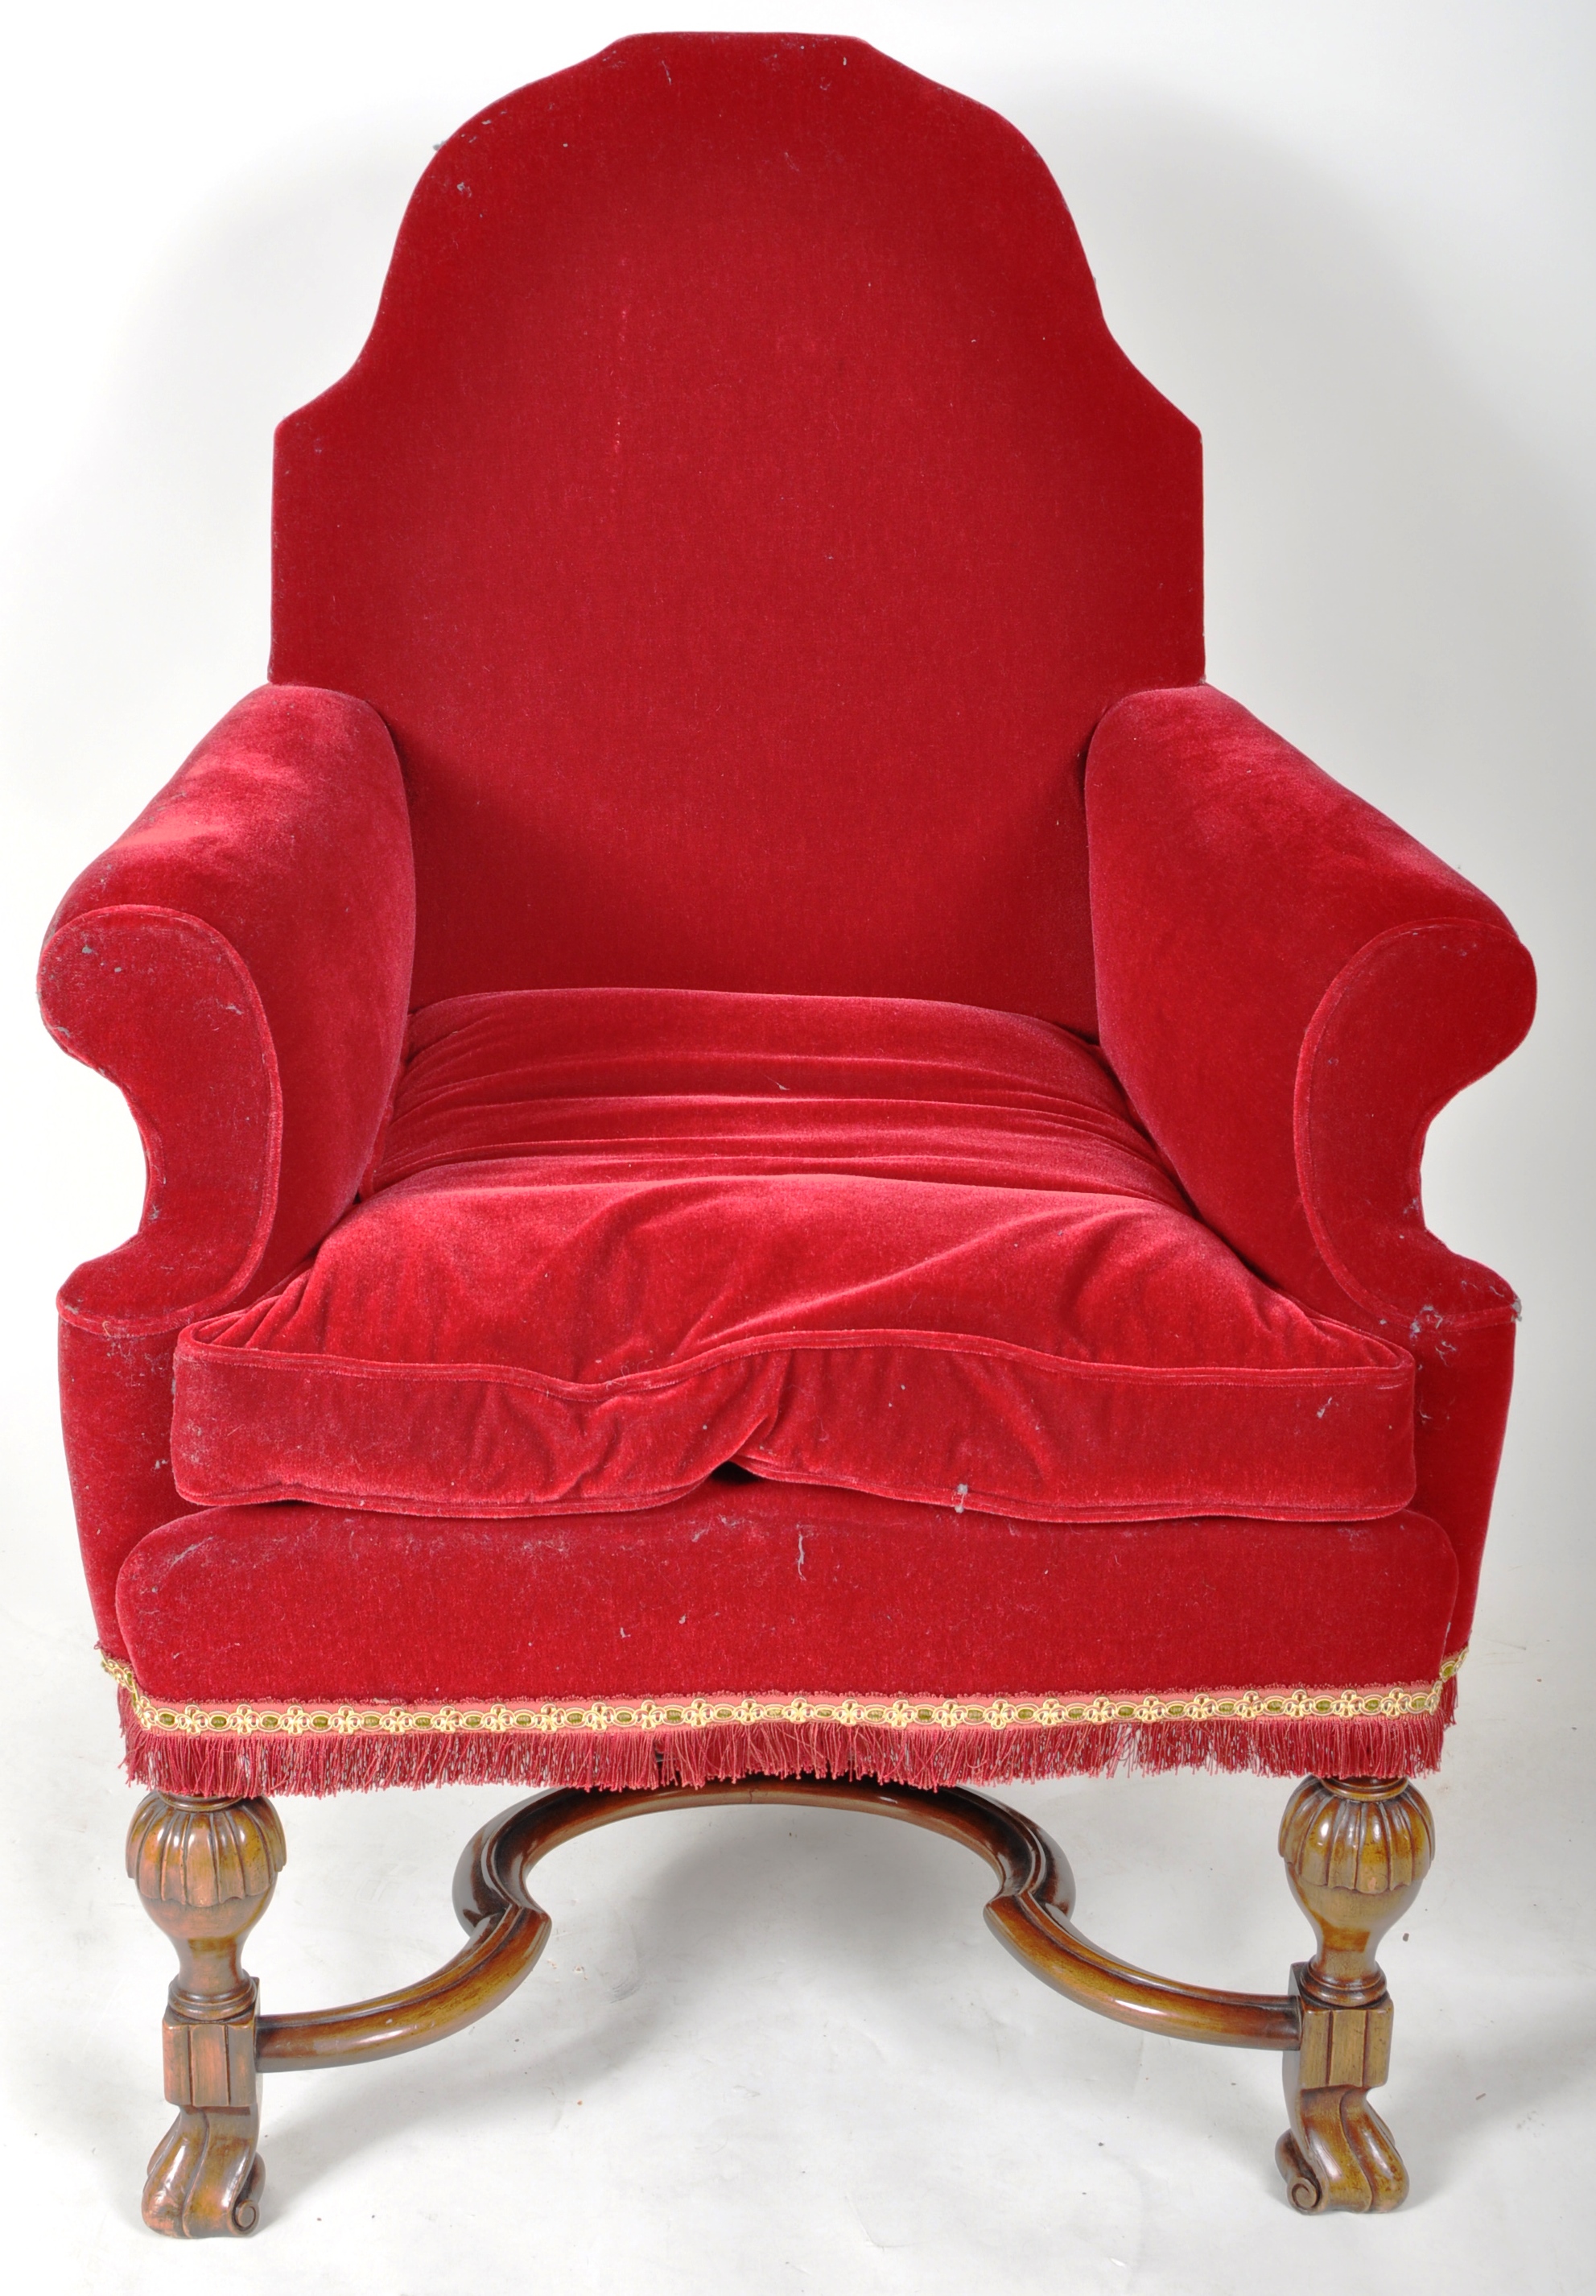 20TH CENTURY QUEEN ANNE REVIVAL FIRESIDE ARMCHAIR - Image 6 of 8